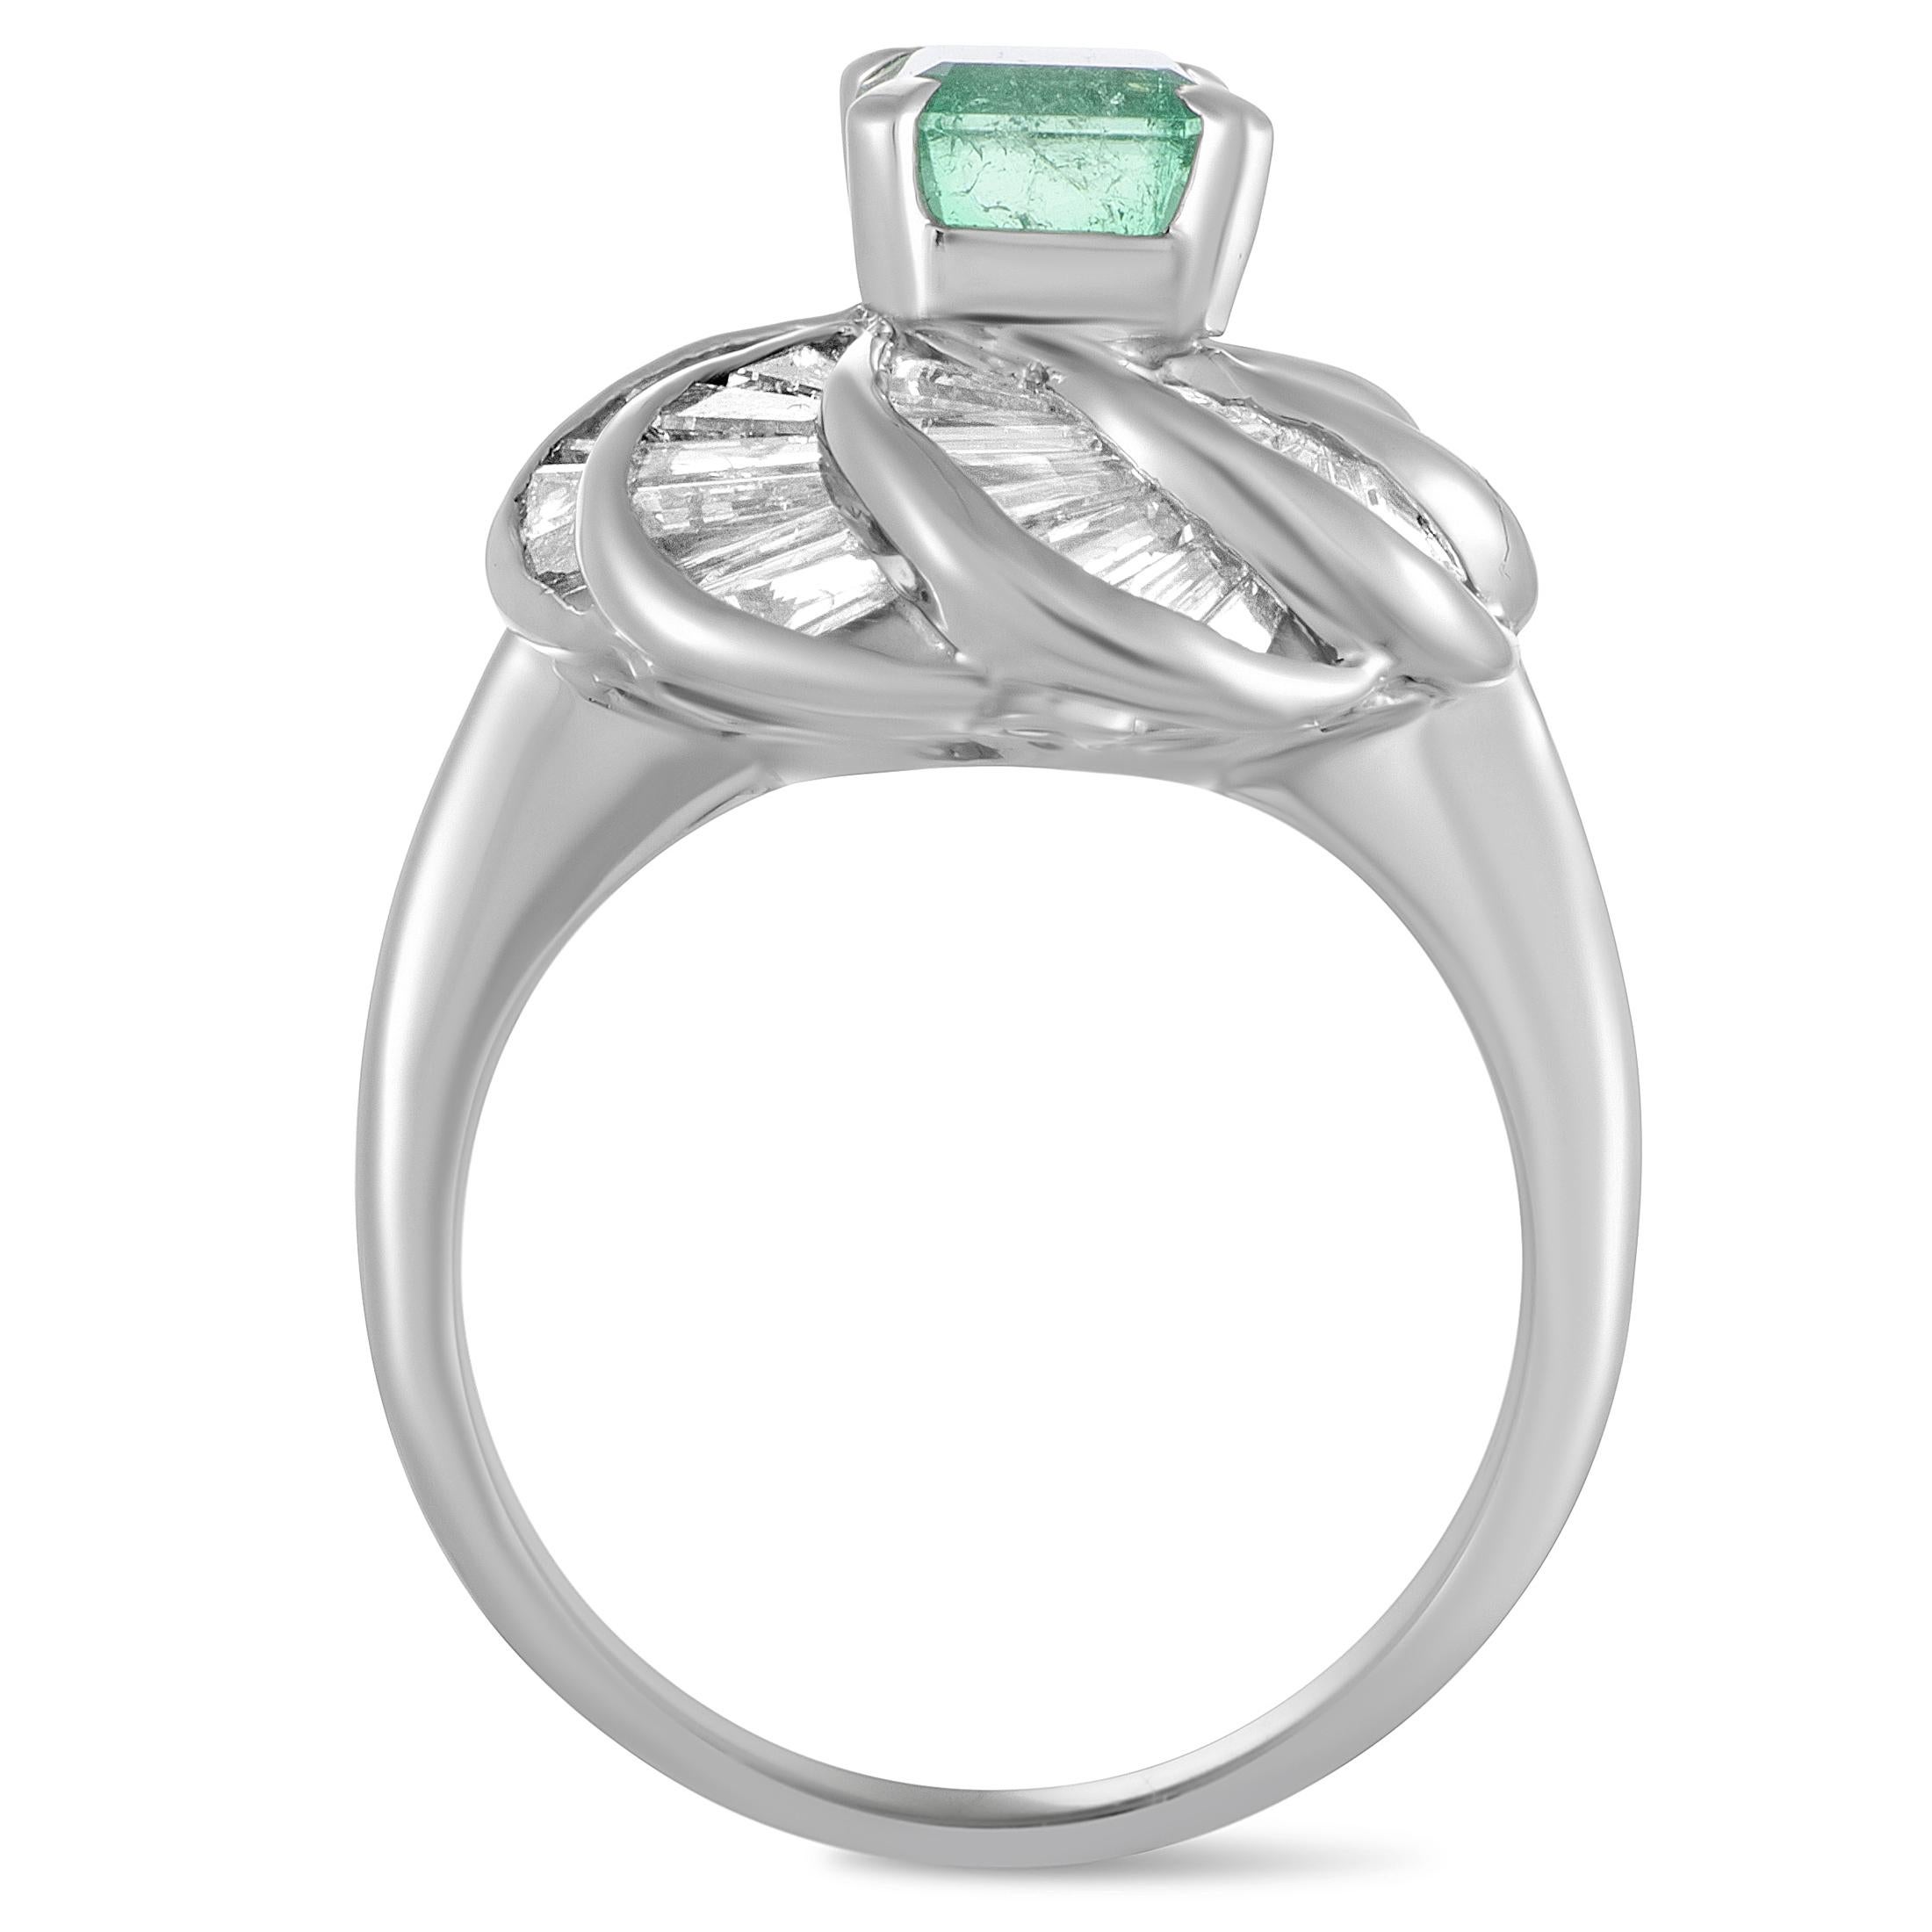 The resplendent diamonds that are beautifully set against the elegant platinum create a stunning backdrop for the expertly cut emerald in this spellbinding ring. The diamonds amount to 2.40 carats and the emerald weighs 1.28 carats.
Ring Top